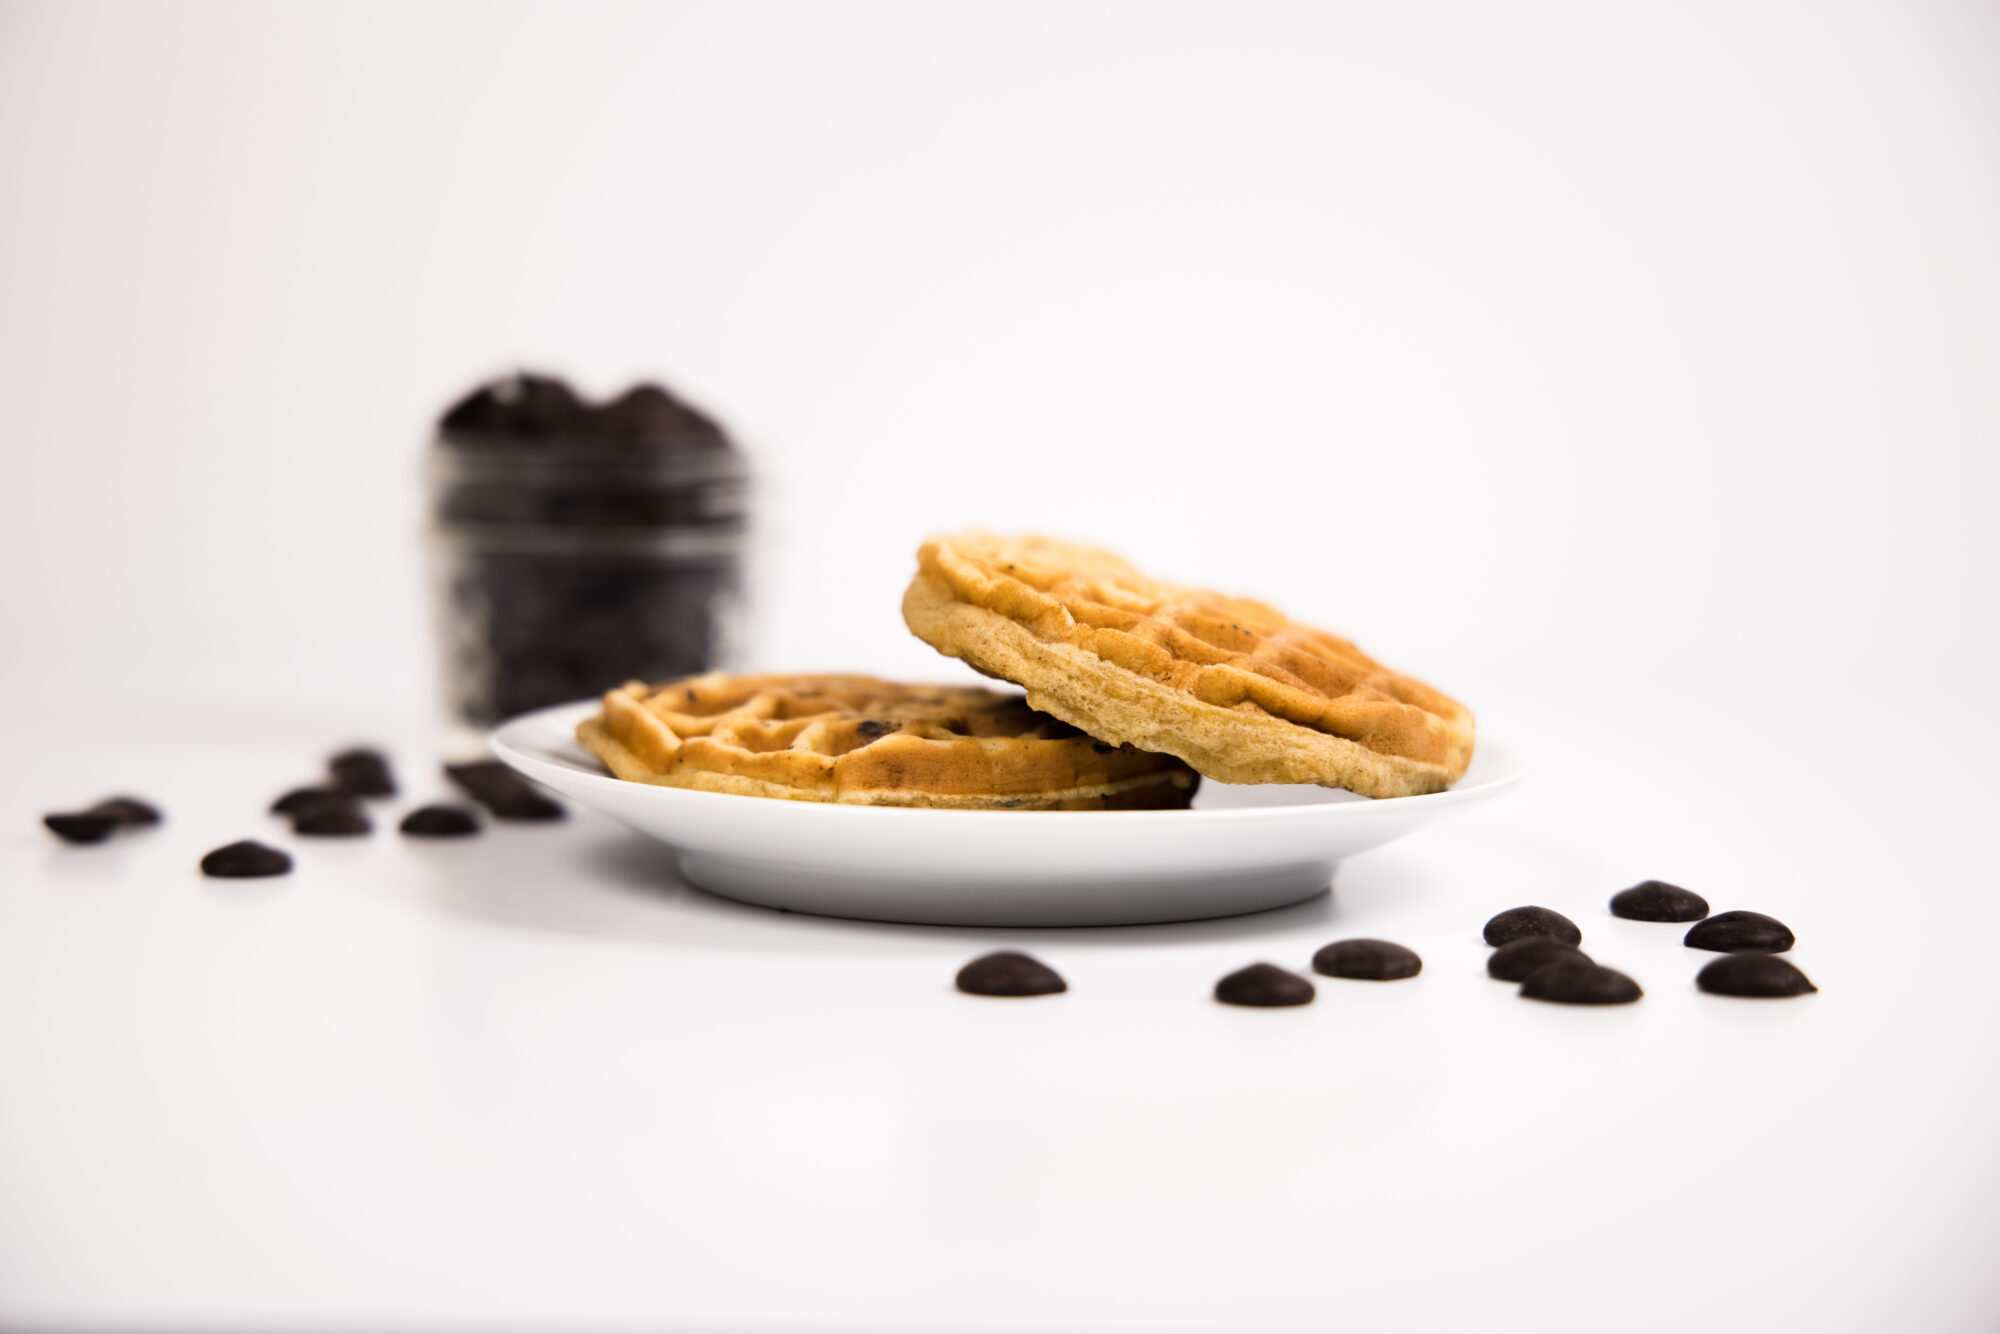 Side view - Two Chocolate Chip Chaffles on a white plate surrounded by chocolate chips.